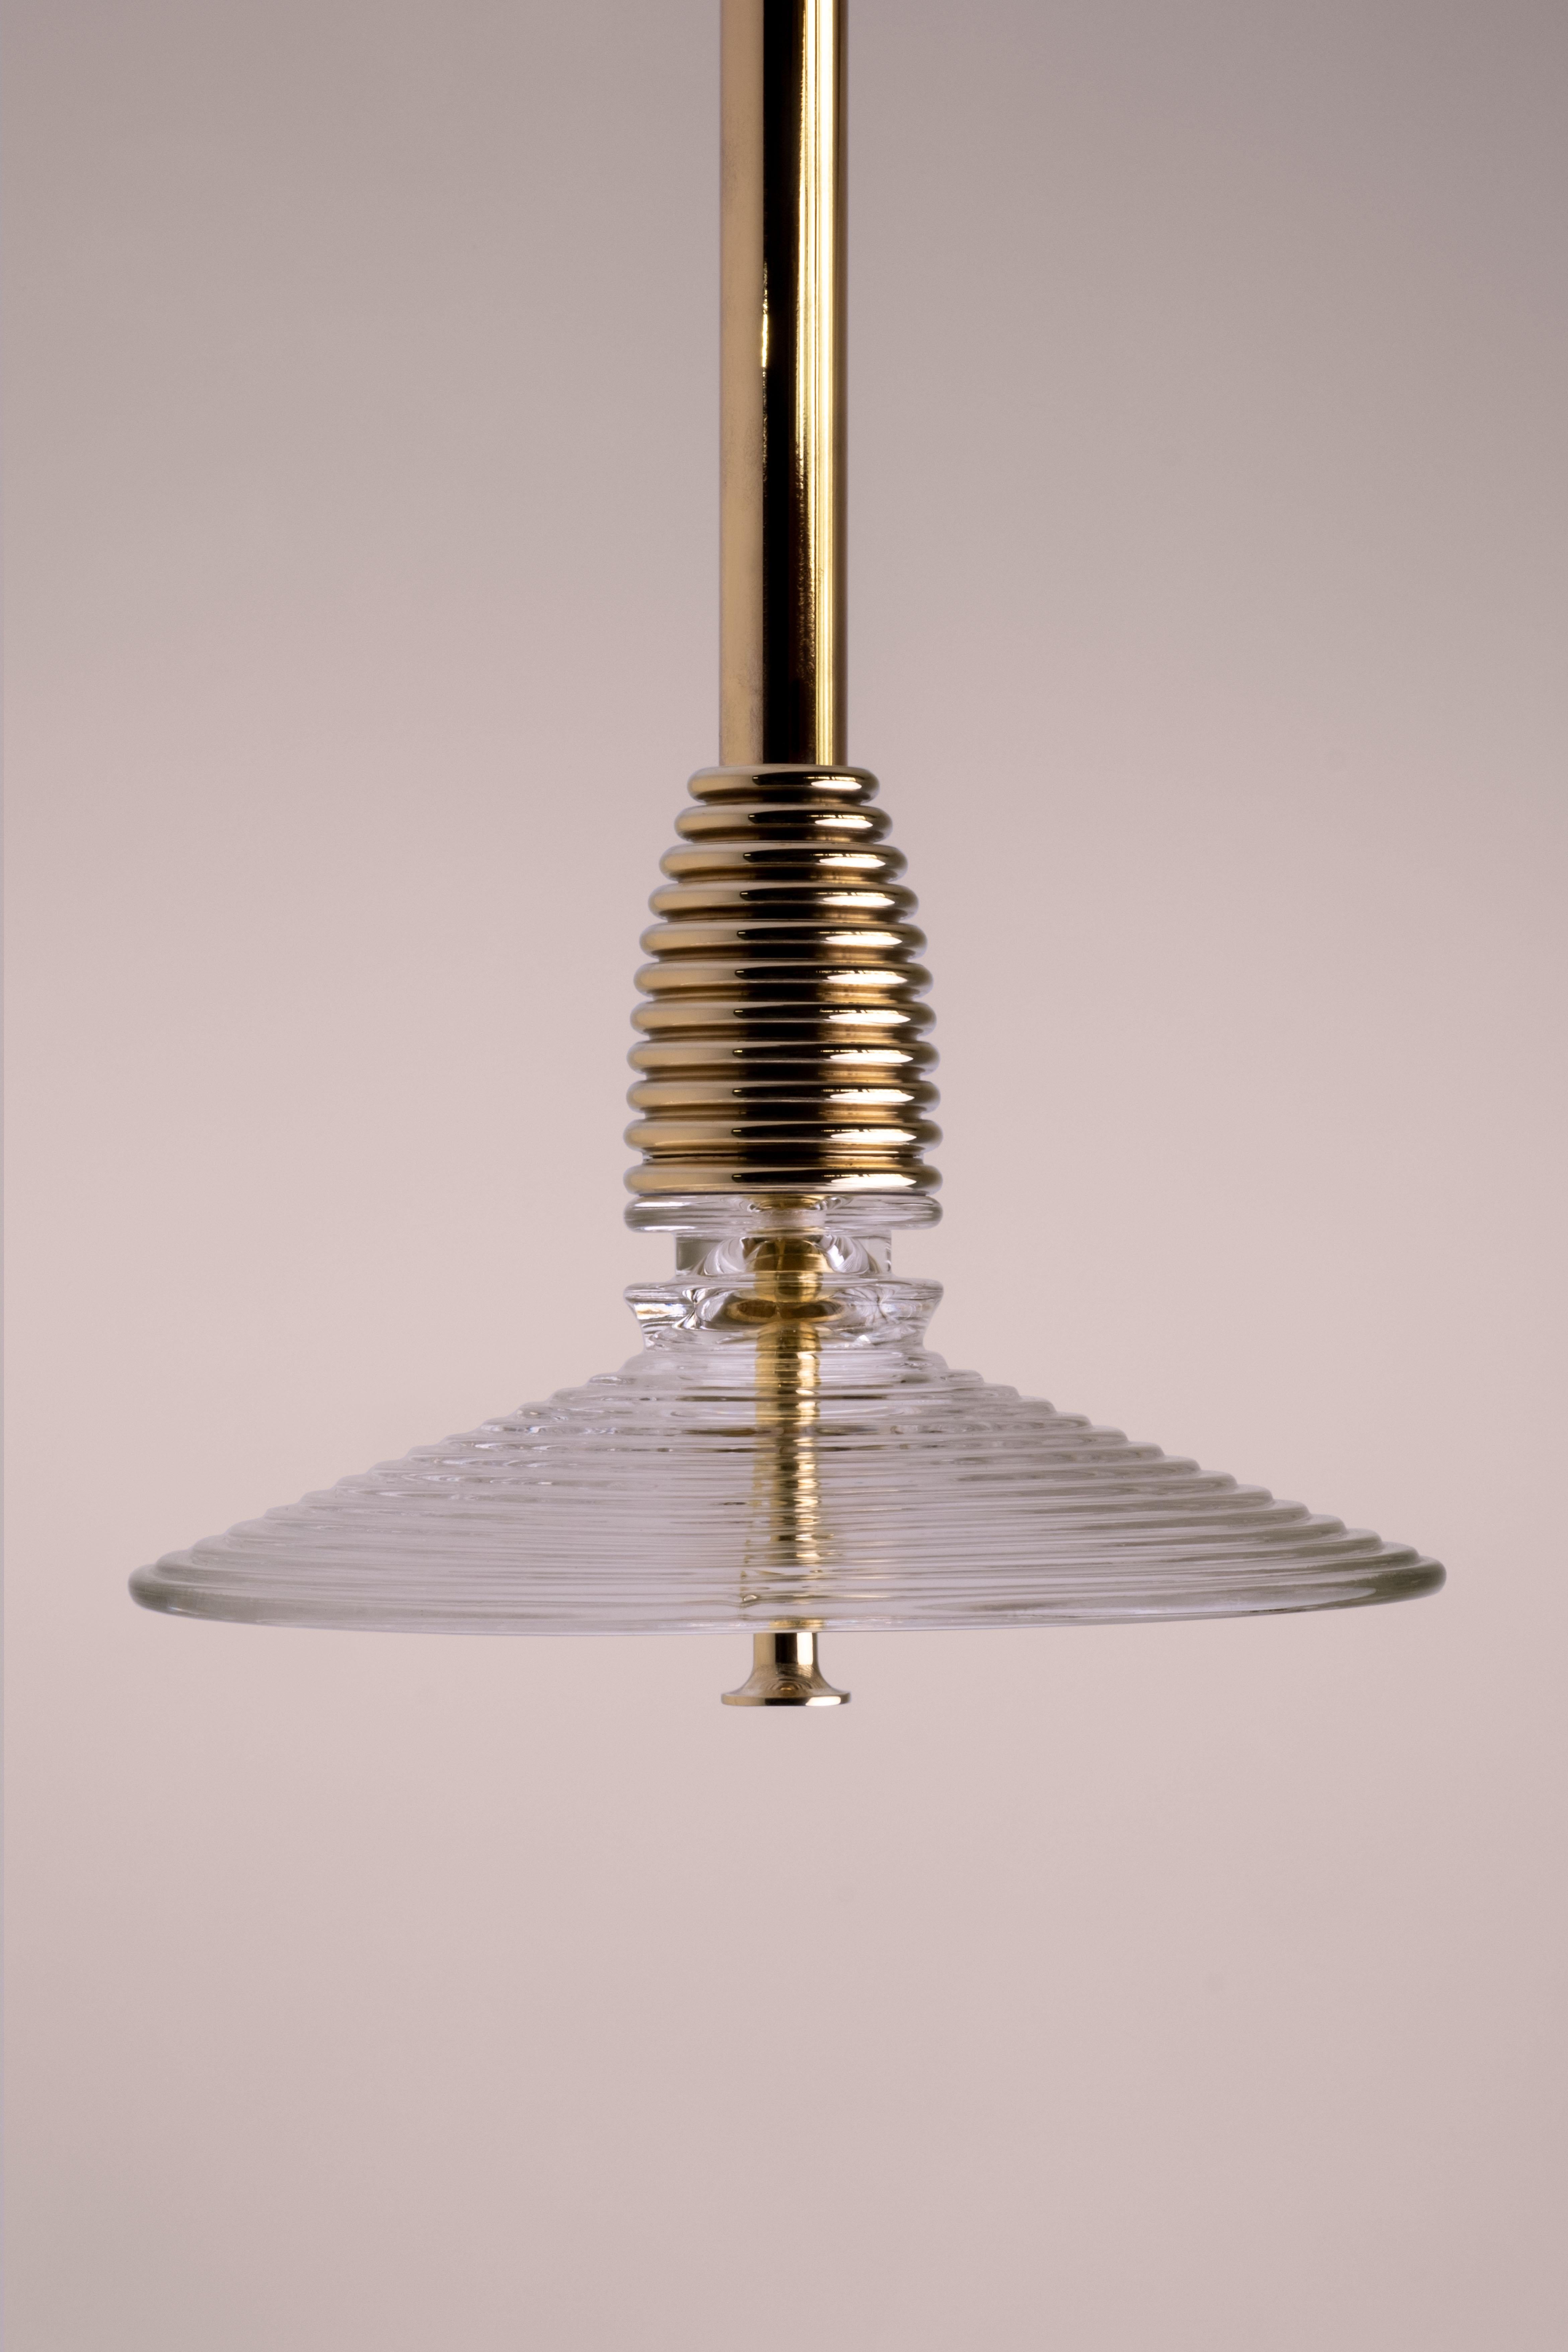 Contemporary The Insulator 'B' Pendant in polished brass and clear glass by NOVOCASTRIAN deco For Sale